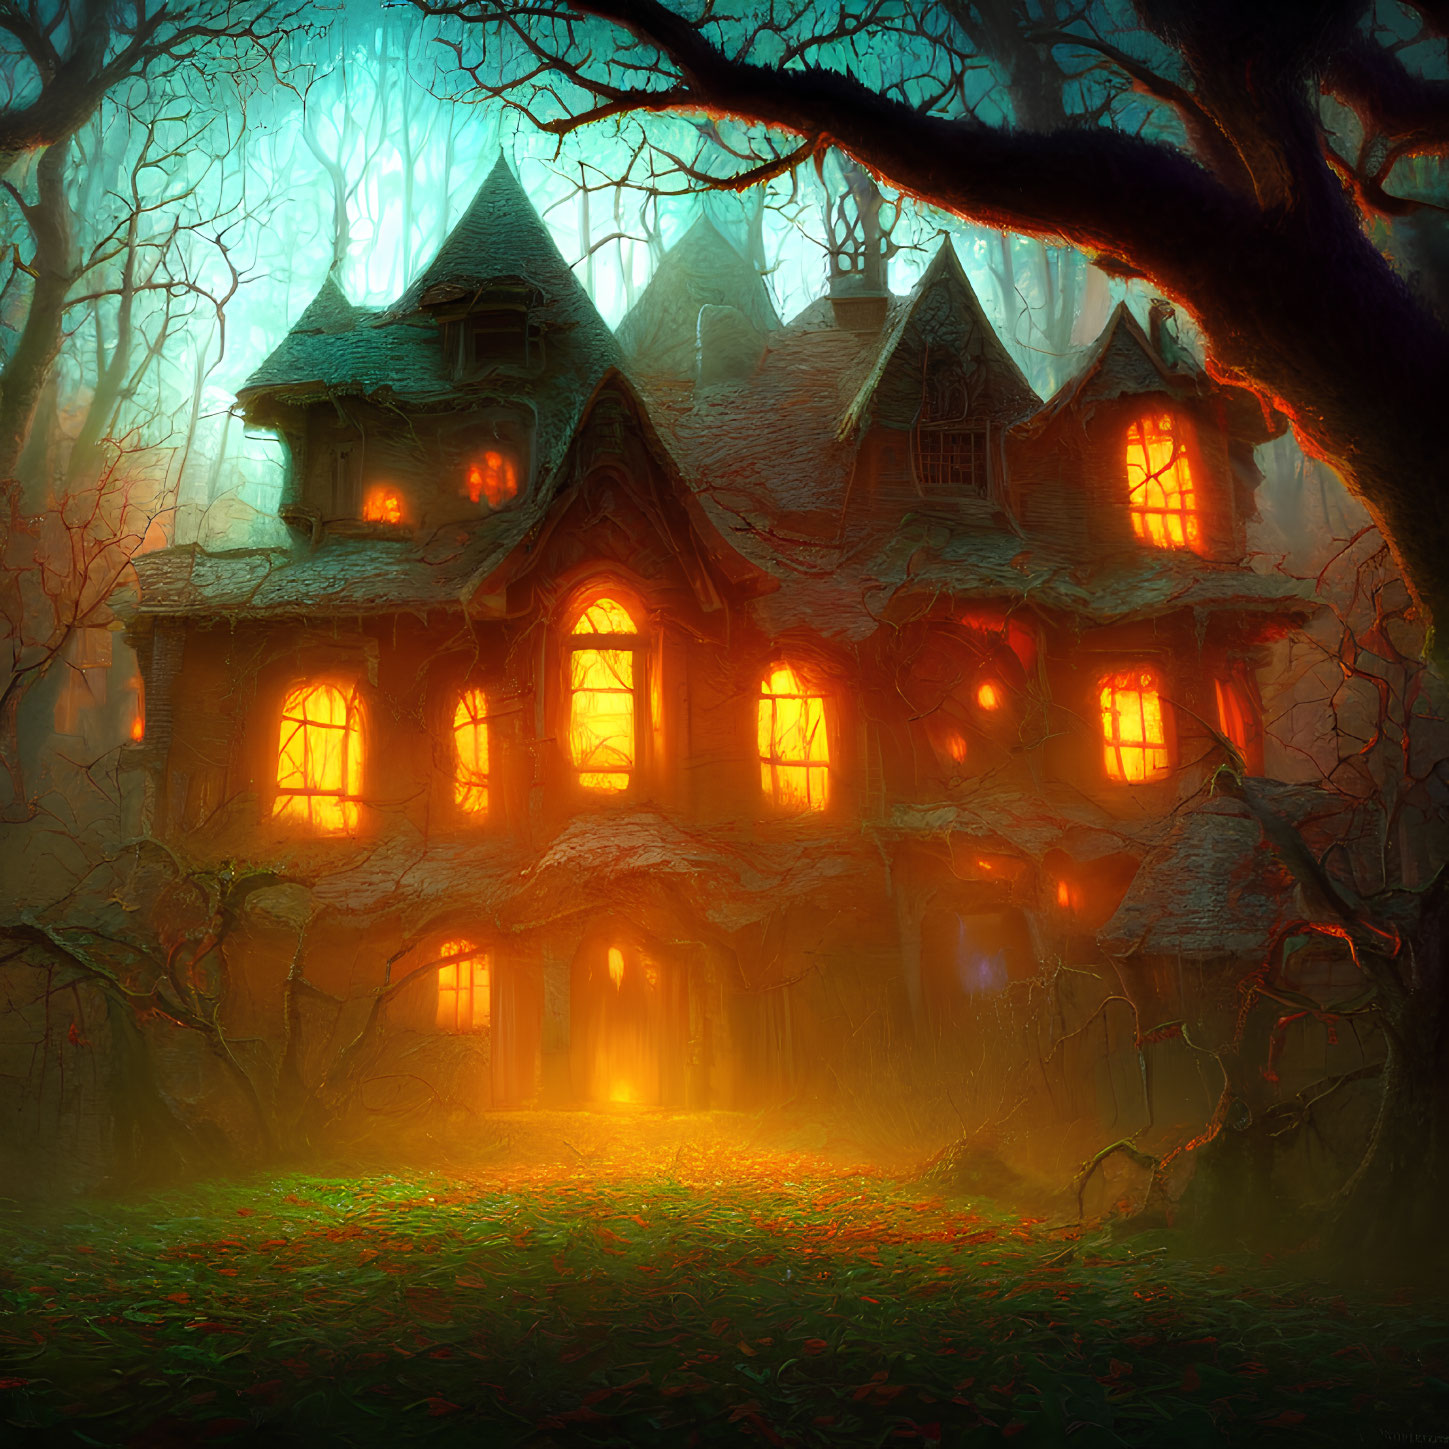 Eerie Tudor-style house in misty enchanted forest